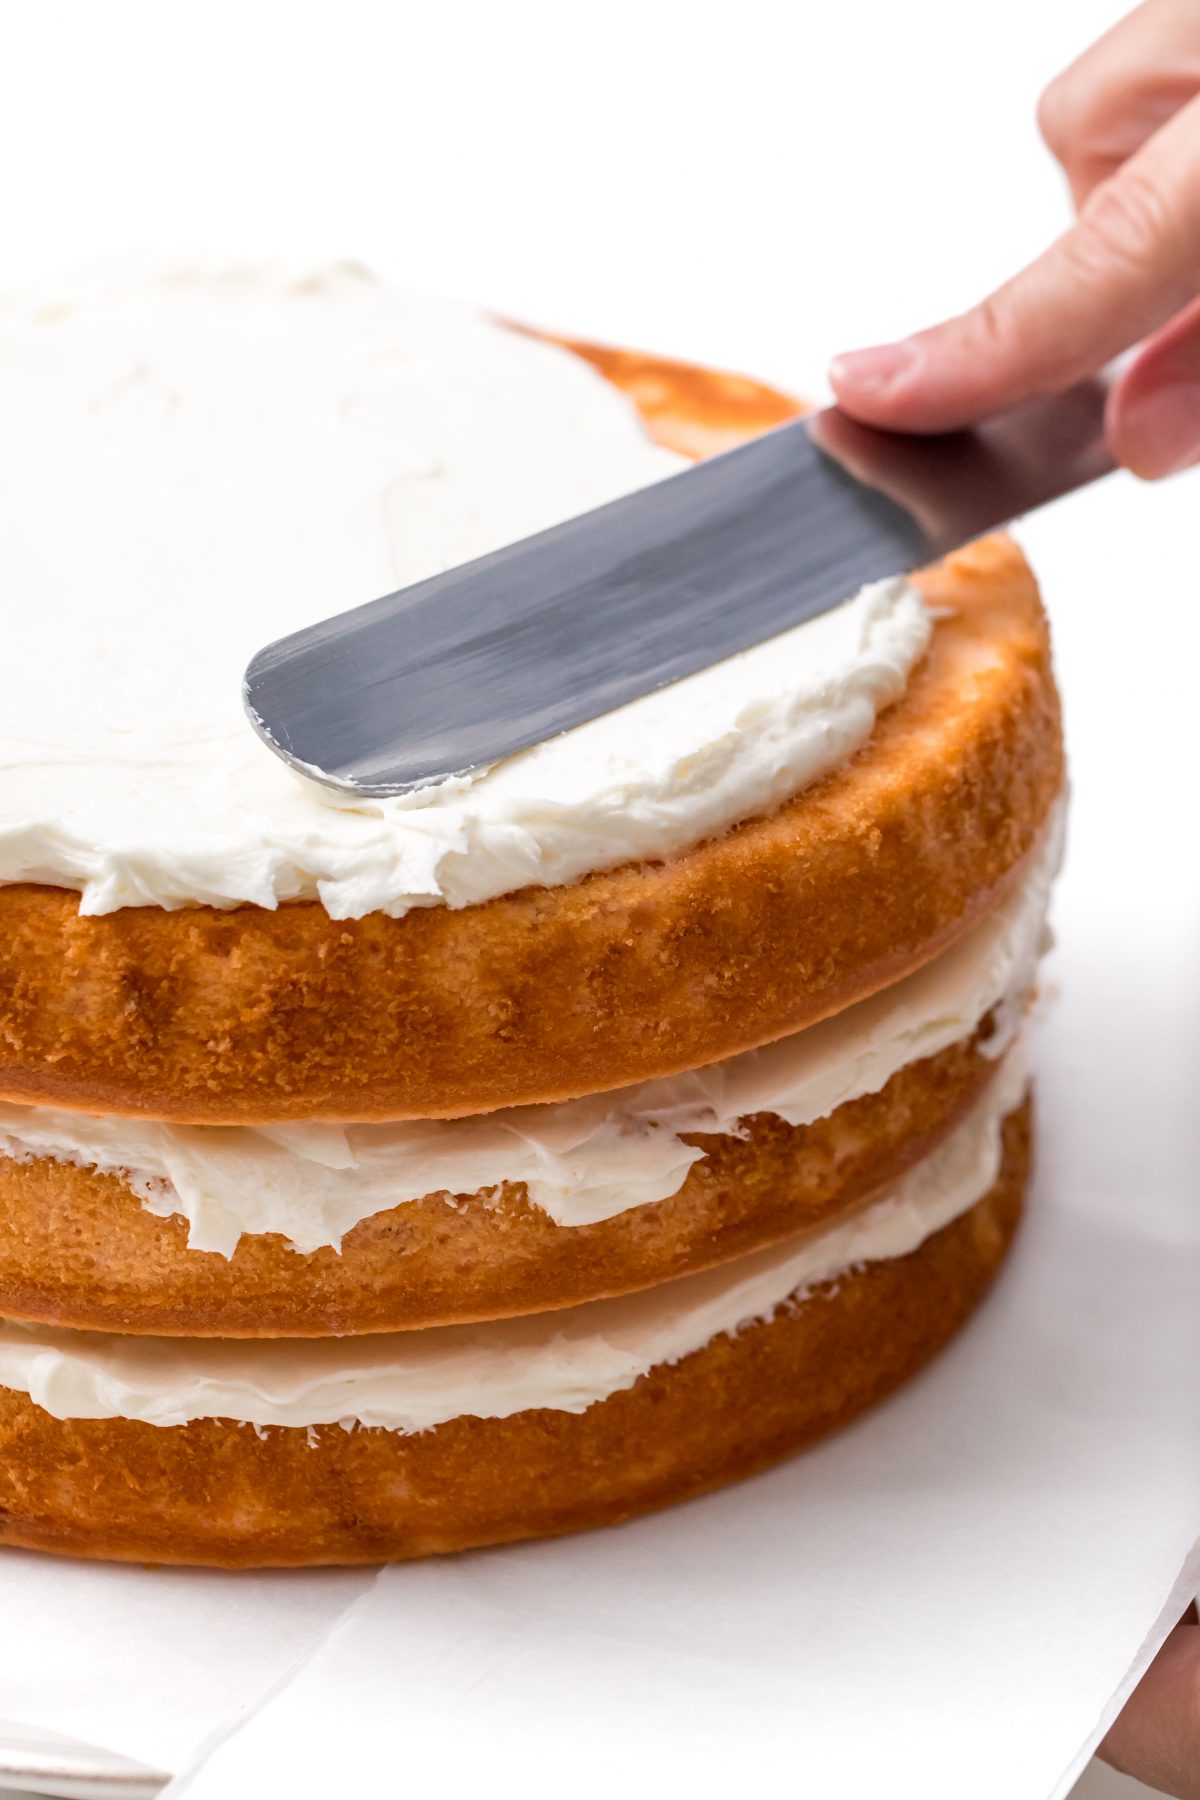 Spread frosting evenly on final cake layer